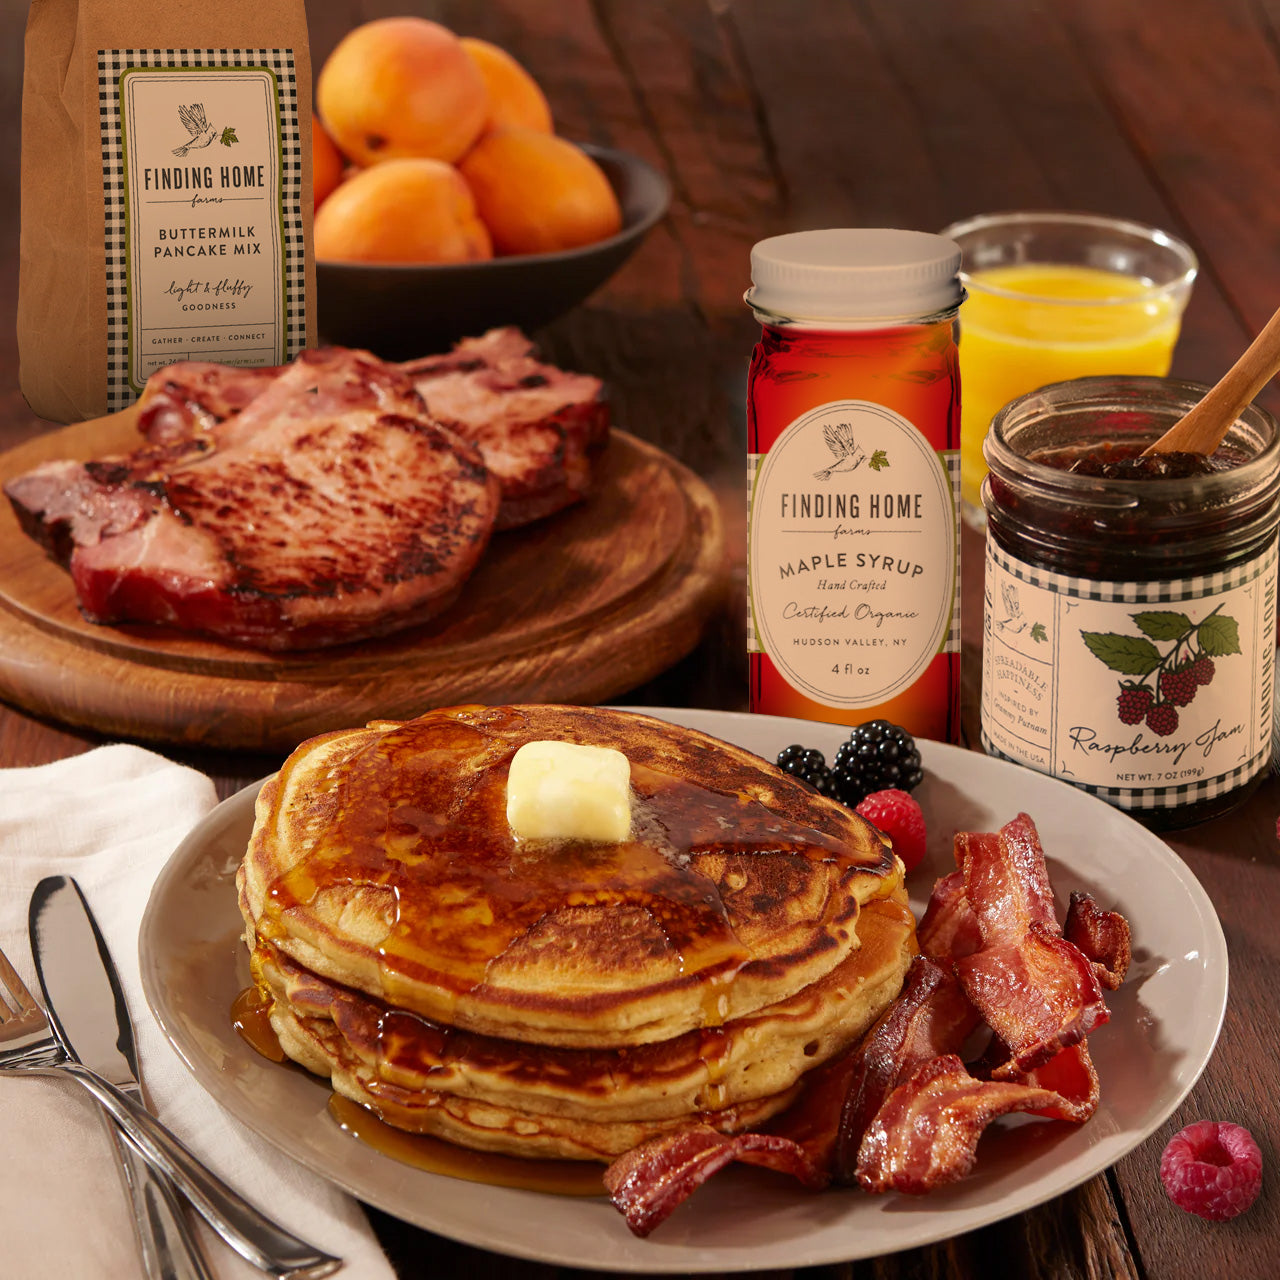 A large western breakfast with smoked pork chops, pancakes, smoked bacon, maple syrup and raspberry jam.